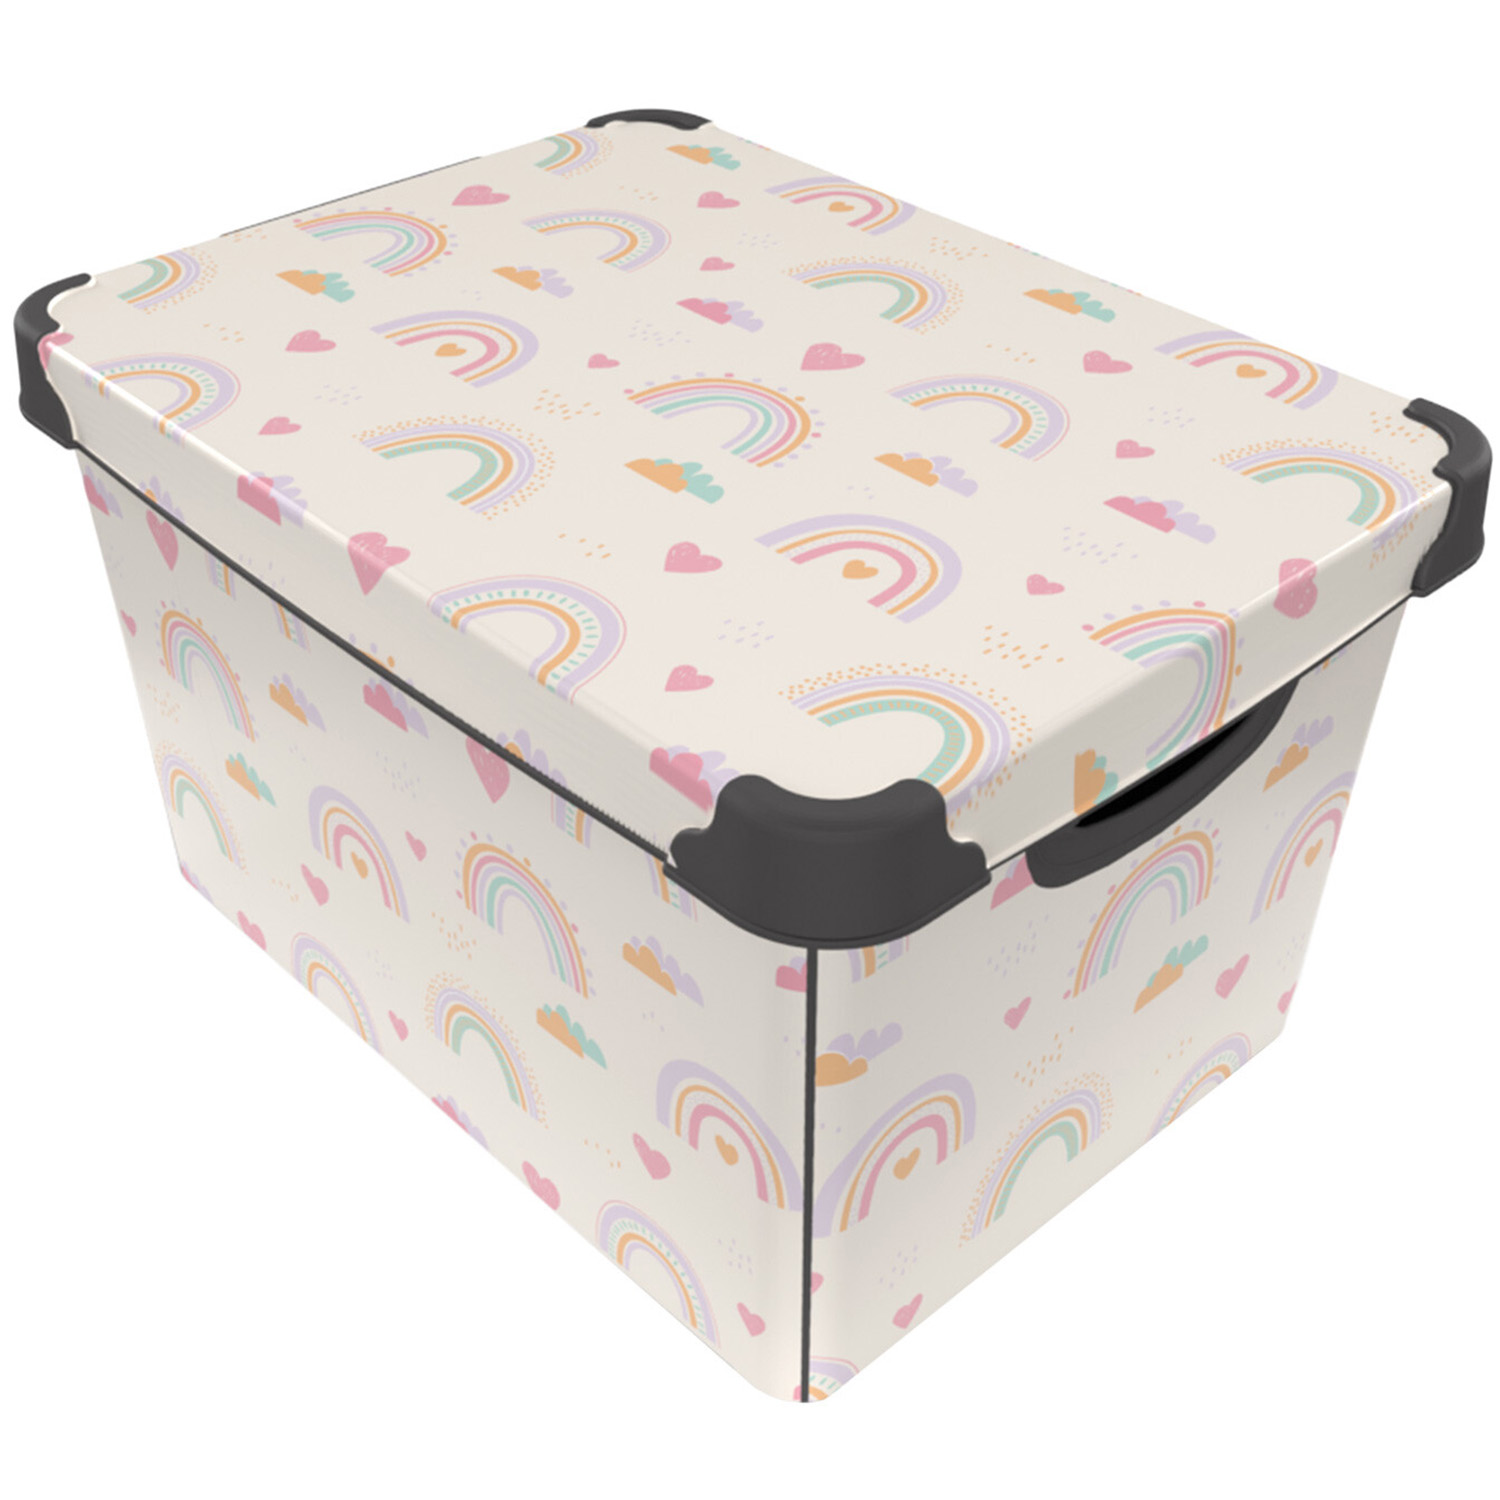 17L Rainbow Patterned Storage Box with Lid Image 1